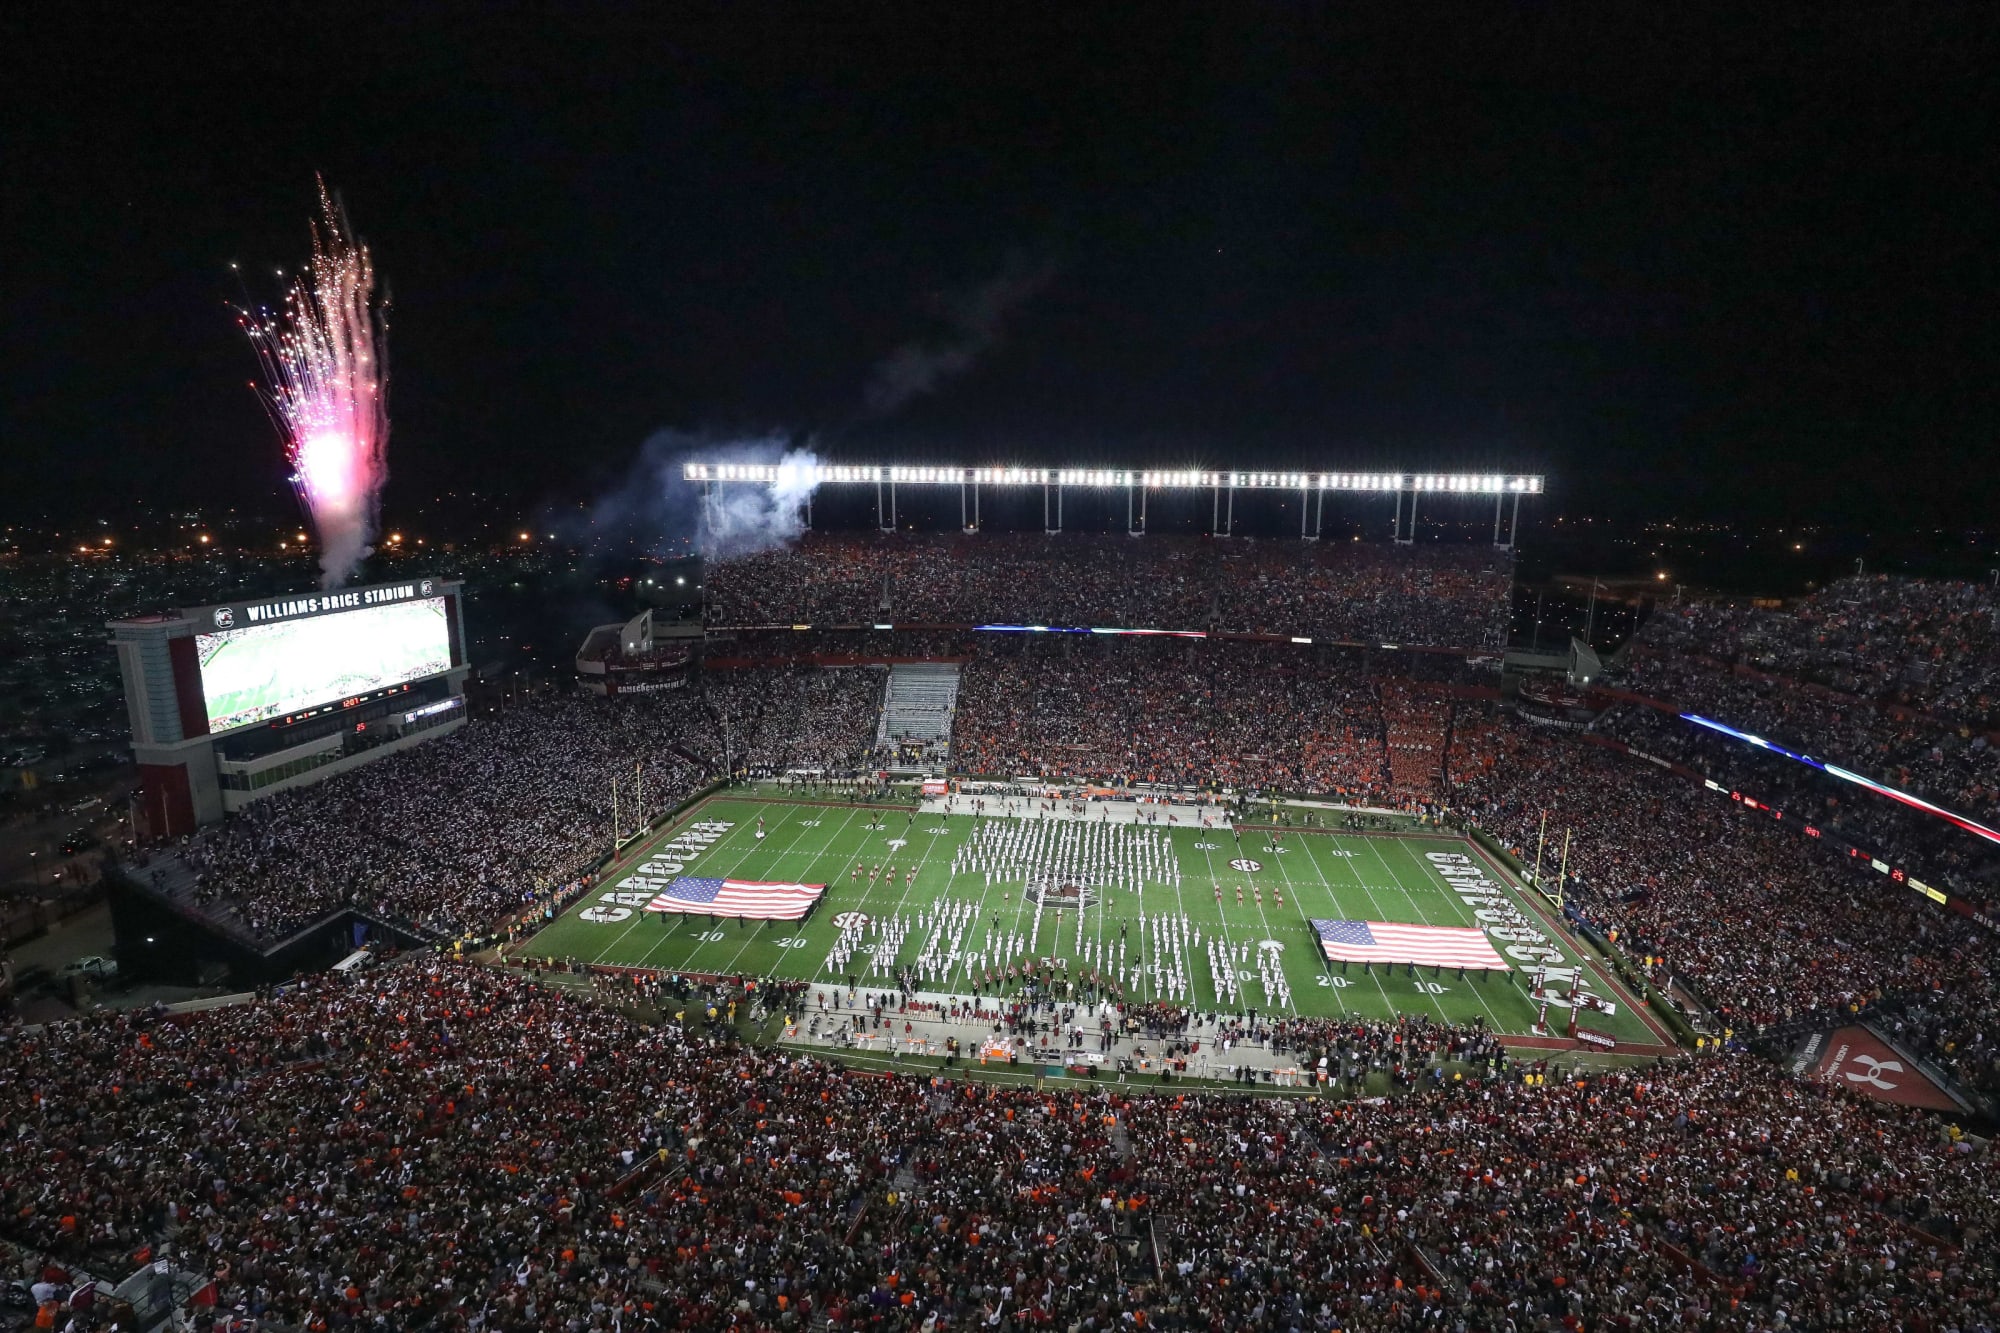 South Carolina Football sells out game, raises excitement for clash against Mississippi State